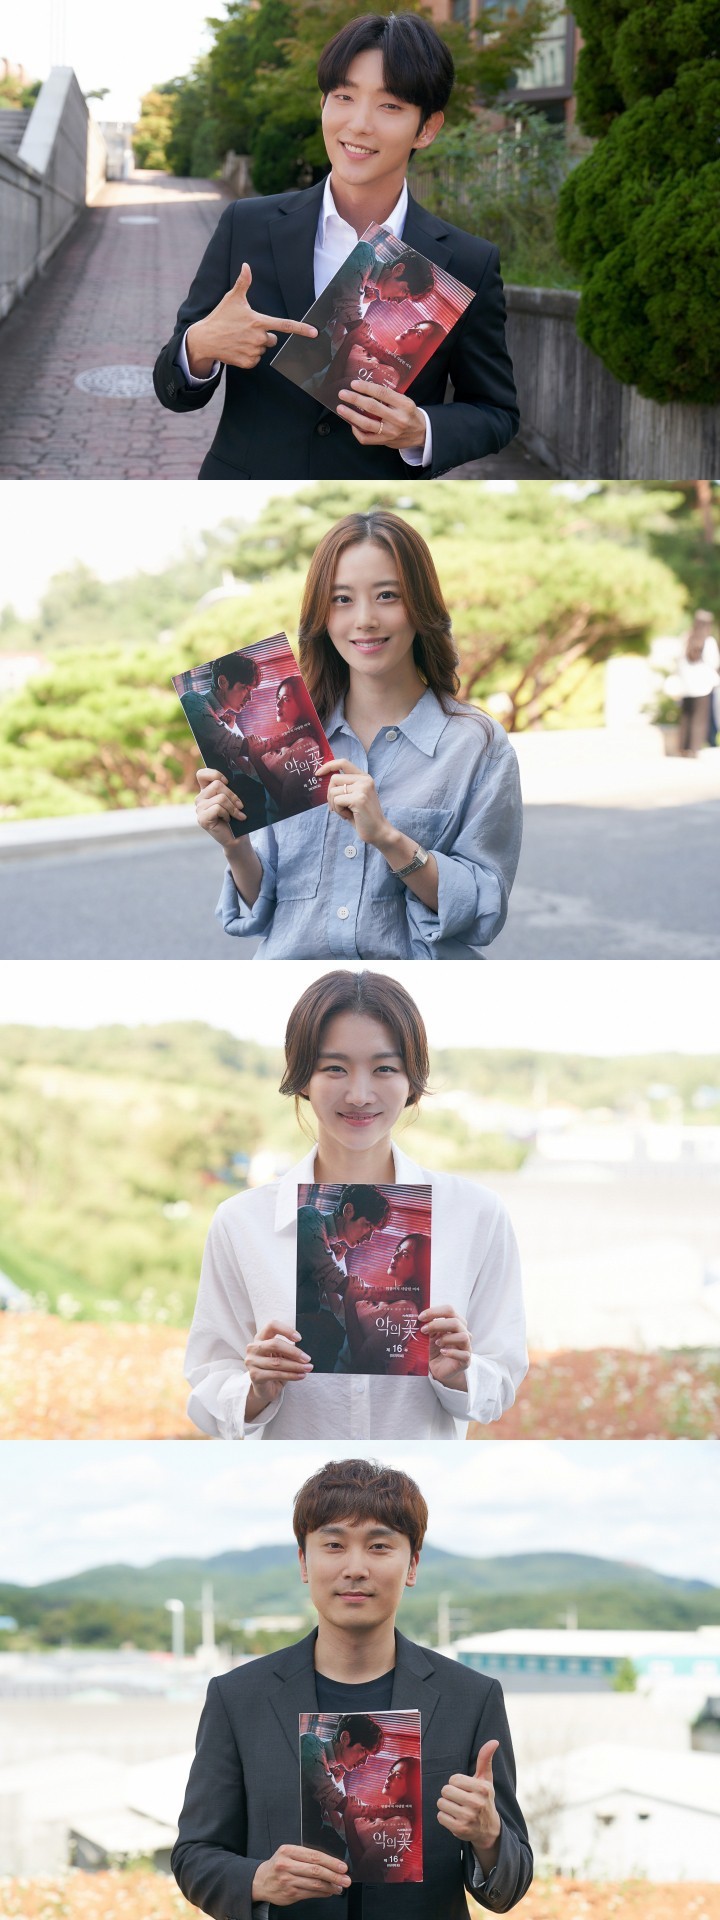 Lee Joon-gi, Moon Chae-won, Jang Hee-jin, and Seo Hyeon-woo expressed their feelings ahead of the end of tvN Wednesday-Thursday evening drama Flower of Evil.TVN Wednesday-Thursday evening drama Flower of Evil (director Kim Cheol-gyu, playwright Yoo Jung-hee, production studio Dragon, monster union) In the last broadcast, Do Hae-soo (Jang Hee-jin), who was in danger of death with two shots toward Do Hyun-soo (Lee Joon-gi) and Baek Hee-sung (Kim Ji-hoon) I decorated the ending while I was floating.Do Hae-soo and Kim Moo-jin, as well as Do Hyun-soos melodrama of Cha JiWon (Moon Chae-won), are also raising explosive questions at the last meeting about what direction they will flow.As the attention of hot viewers is focused more than ever, the protagonists of the Flower of Evil, which is performing a series of hot performances in the play, presented a special message to repay the love.Lee Joon-gi of Do Hyun-soo, who proved the class of Myeongbul-jeon, said, All the flowers of evil that have been running for the past seven months have been completed.In fact, when I first started, it felt difficult and I felt a lot of pressure to do well.I think it was able to finish well thanks to the bishop, the artist, the staff and the fellow actors who have been together. I was really grateful to the audience who enjoyed and supported the Flower of Evil together, so I was able to finish it with more power.Although every work has done, Flower of Evil seems to have a long toxicity.I would like to express my sincere gratitude and love to all those who love Flower of Evil and Do Hyun-soo. Moon Chae-won, who wrote another life character as Cha JiWon, said, I do not yet realize that the flower of evil, which spent three seasons together from warm spring to cool autumn, is about to end.I think it will be remembered to me as a work that is more rewarding than ever because I have done my best to shoot. I am deeply grateful to the viewers who loved the drama.There were moments that were difficult and difficult as I wanted to express my feelings with the character Cha JiWon as true as possible.But thanks to the love that viewers sent me, I was able to overcome it well.It was a really happy time to meet all the staff including Kim Chul-gyu, Yoo Jung-hee, and fellow actors with good works.I would like to ask for your interest and expectation for the flower of evil until the end. Jang Hee-jin of Dohaesu Station, who had a stronger heart than anyone in a thin atmosphere, said, It was a happy time to receive an unexpected big love.I would like to express my sincere gratitude to all the people who made it together and the viewers who have been begging.I hope you will join me until the end of the final episode of Flower of Evil will be broadcast tonight. Seo Hyeon-woo, who has proved the genre-unlimited acting spectrum in the role of Kim Moo-jin, also said, Thanks to the hot love and interest of the viewers, I think I was able to finish well with my staff and safety.I hope that the audience will be able to work hard and that the flower of evil will be a sincere comfort to rest for a while in the difficult situation. The final page of the high-density emotional tracking drama of the two people facing the truth that they want to ignore, Baek Hee-sung (Do Hyun-soo), the man who played even love, and his wife Cha JiWon, who started to doubt his reality, can be seen at the last episode of tvN Wednesday-Thursday evening drama Flower of Evil at 10:50 pm today (23rd).